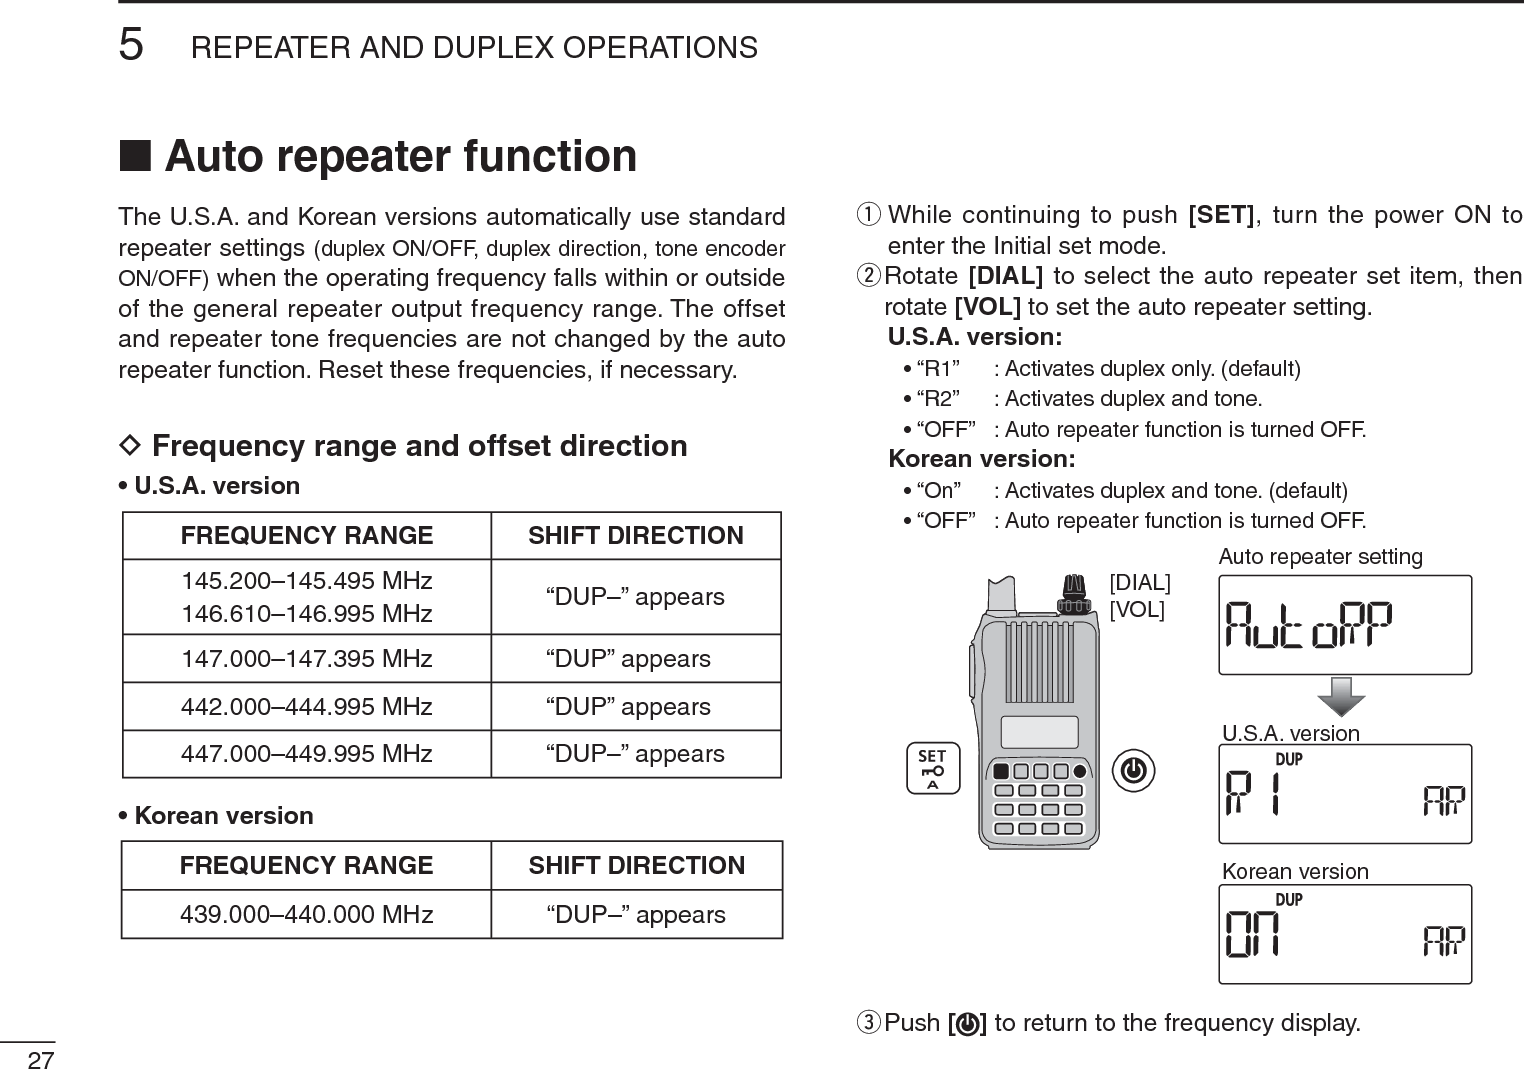 275REPEATER AND DUPLEX OPERATIONSN Auto repeater functionThe U.S.A. and Korean versions automatically use standard repeater settings (duplex ON/OFF, duplex direction, tone encoder ON/OFF) when the operating frequency falls within or outside of the general repeater output frequency range. The offset and repeater tone frequencies are not changed by the auto repeater function. Reset these frequencies, if necessary.DFrequency range and offset direction• U.S.A. version• Korean versionFREQUENCY RANGE SHIFT DIRECTION439.000–440.000 MHz “DUP–” appearsq  While continuing to push [SET], turn the power ON to enter the Initial set mode.w  Rotate [DIAL] to select the auto repeater set item, then rotate [VOL] to set the auto repeater setting.U.S.A. version:    • “R1”    : Activates duplex only. (default)    • “R2”    : Activates duplex and tone.    • “OFF” : Auto repeater function is turned OFF.Korean version:    • “On”    : Activates duplex and tone. (default)    • “OFF” : Auto repeater function is turned OFF.[VOL][DIAL]U.S.A. versionKorean versionAuto repeater settinge  Push [ ] to return to the frequency display.FREQUENCY RANGE SHIFT DIRECTION147.000–147.395 MHz “DUP” appears442.000–444.995 MHz “DUP” appears447.000–449.995 MHz “DUP–” appears145.200–145.495 MHz146.610–146.995 MHz “DUP–” appears